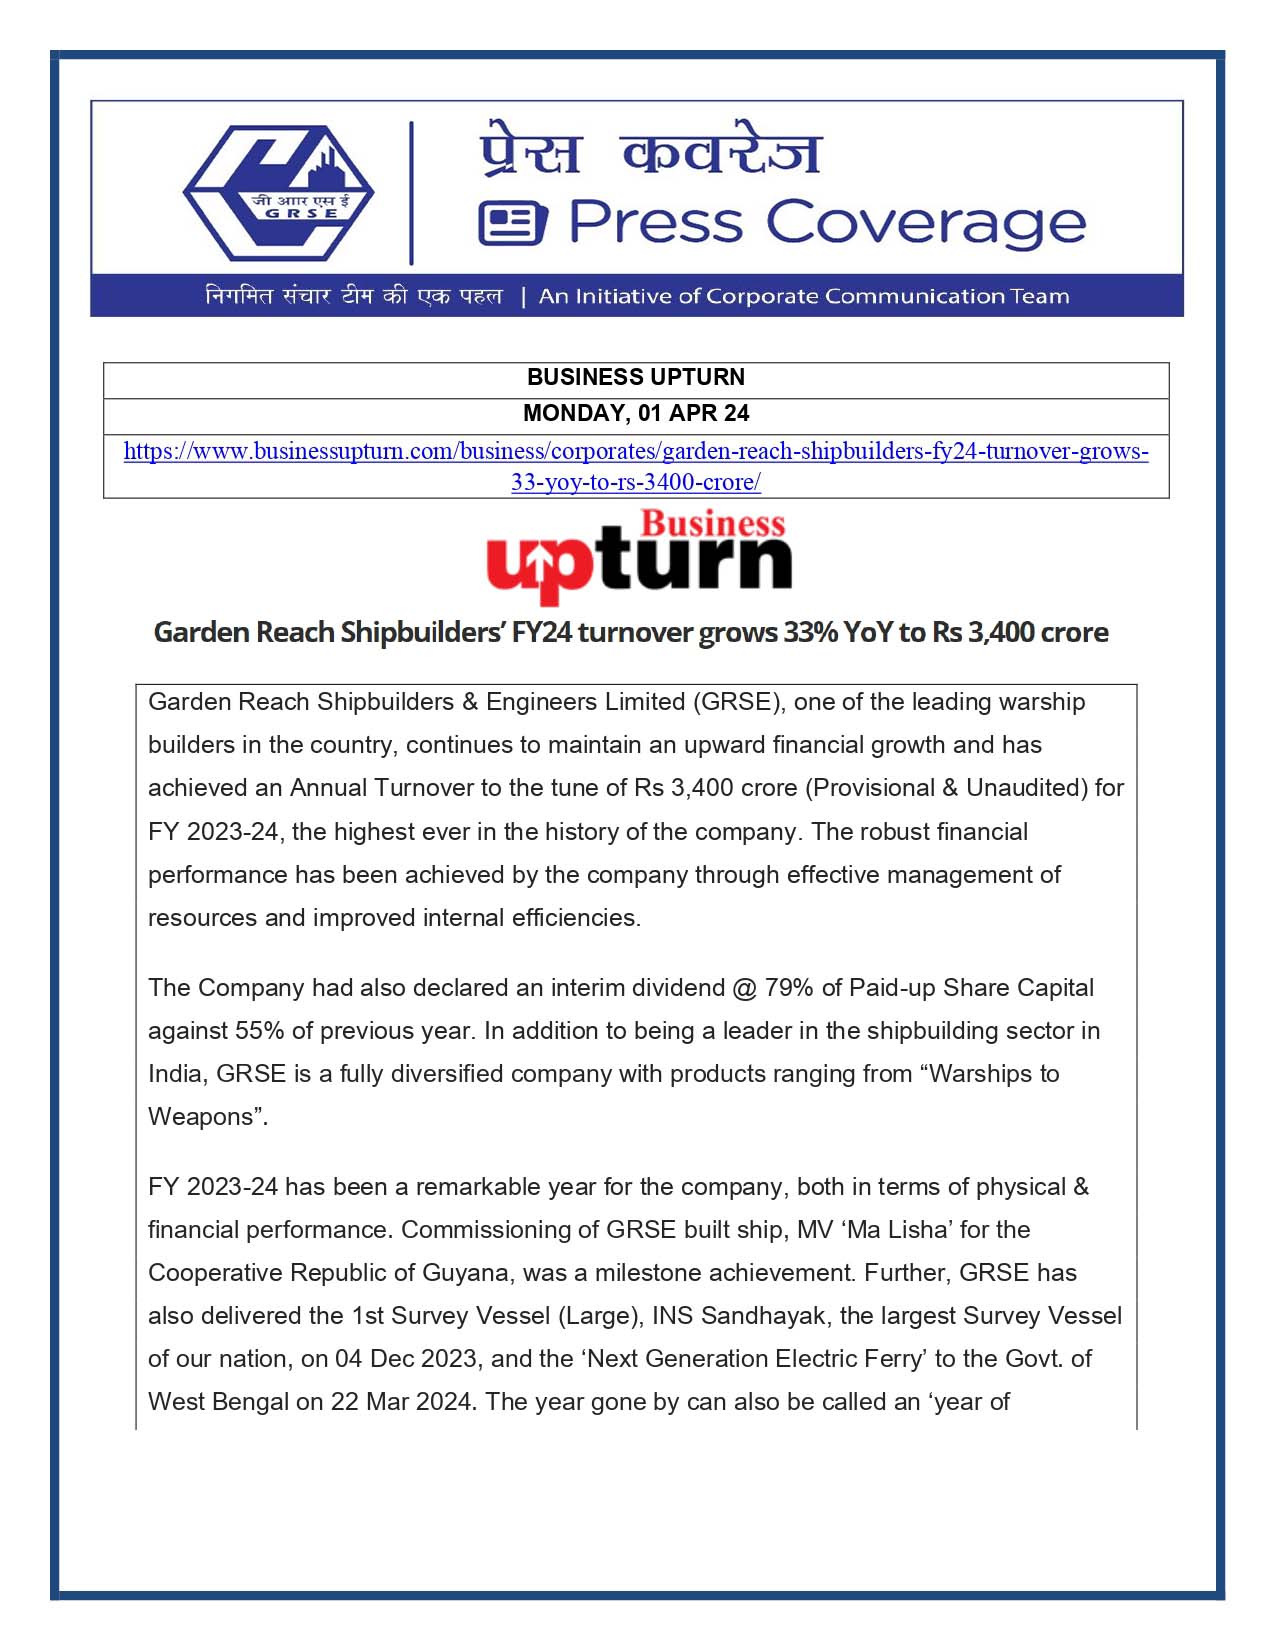 Press Coverage : Business Upturn, 01 Apr 24 : Garden Reach Shipbuilders FY 24 turnover grows 33% YoY to Rs 3400 Crore